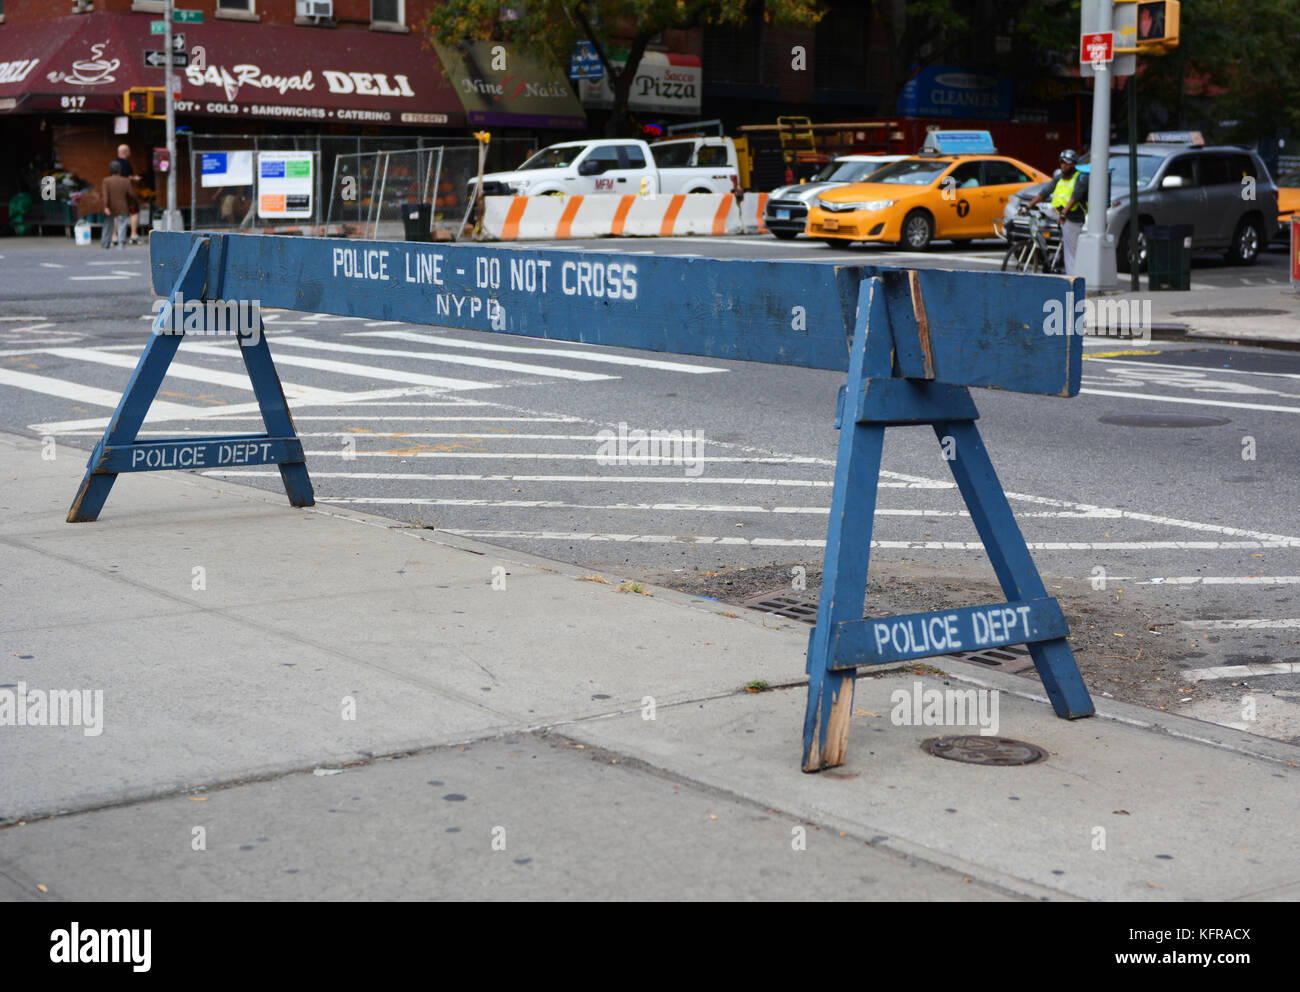 NEW YORK - OCTOBER 23, 2017: Police line do not cross wooden barrier stands on a sidewalk. Traffic waits beyond at the corner of West 54th Street and  Stock Photo